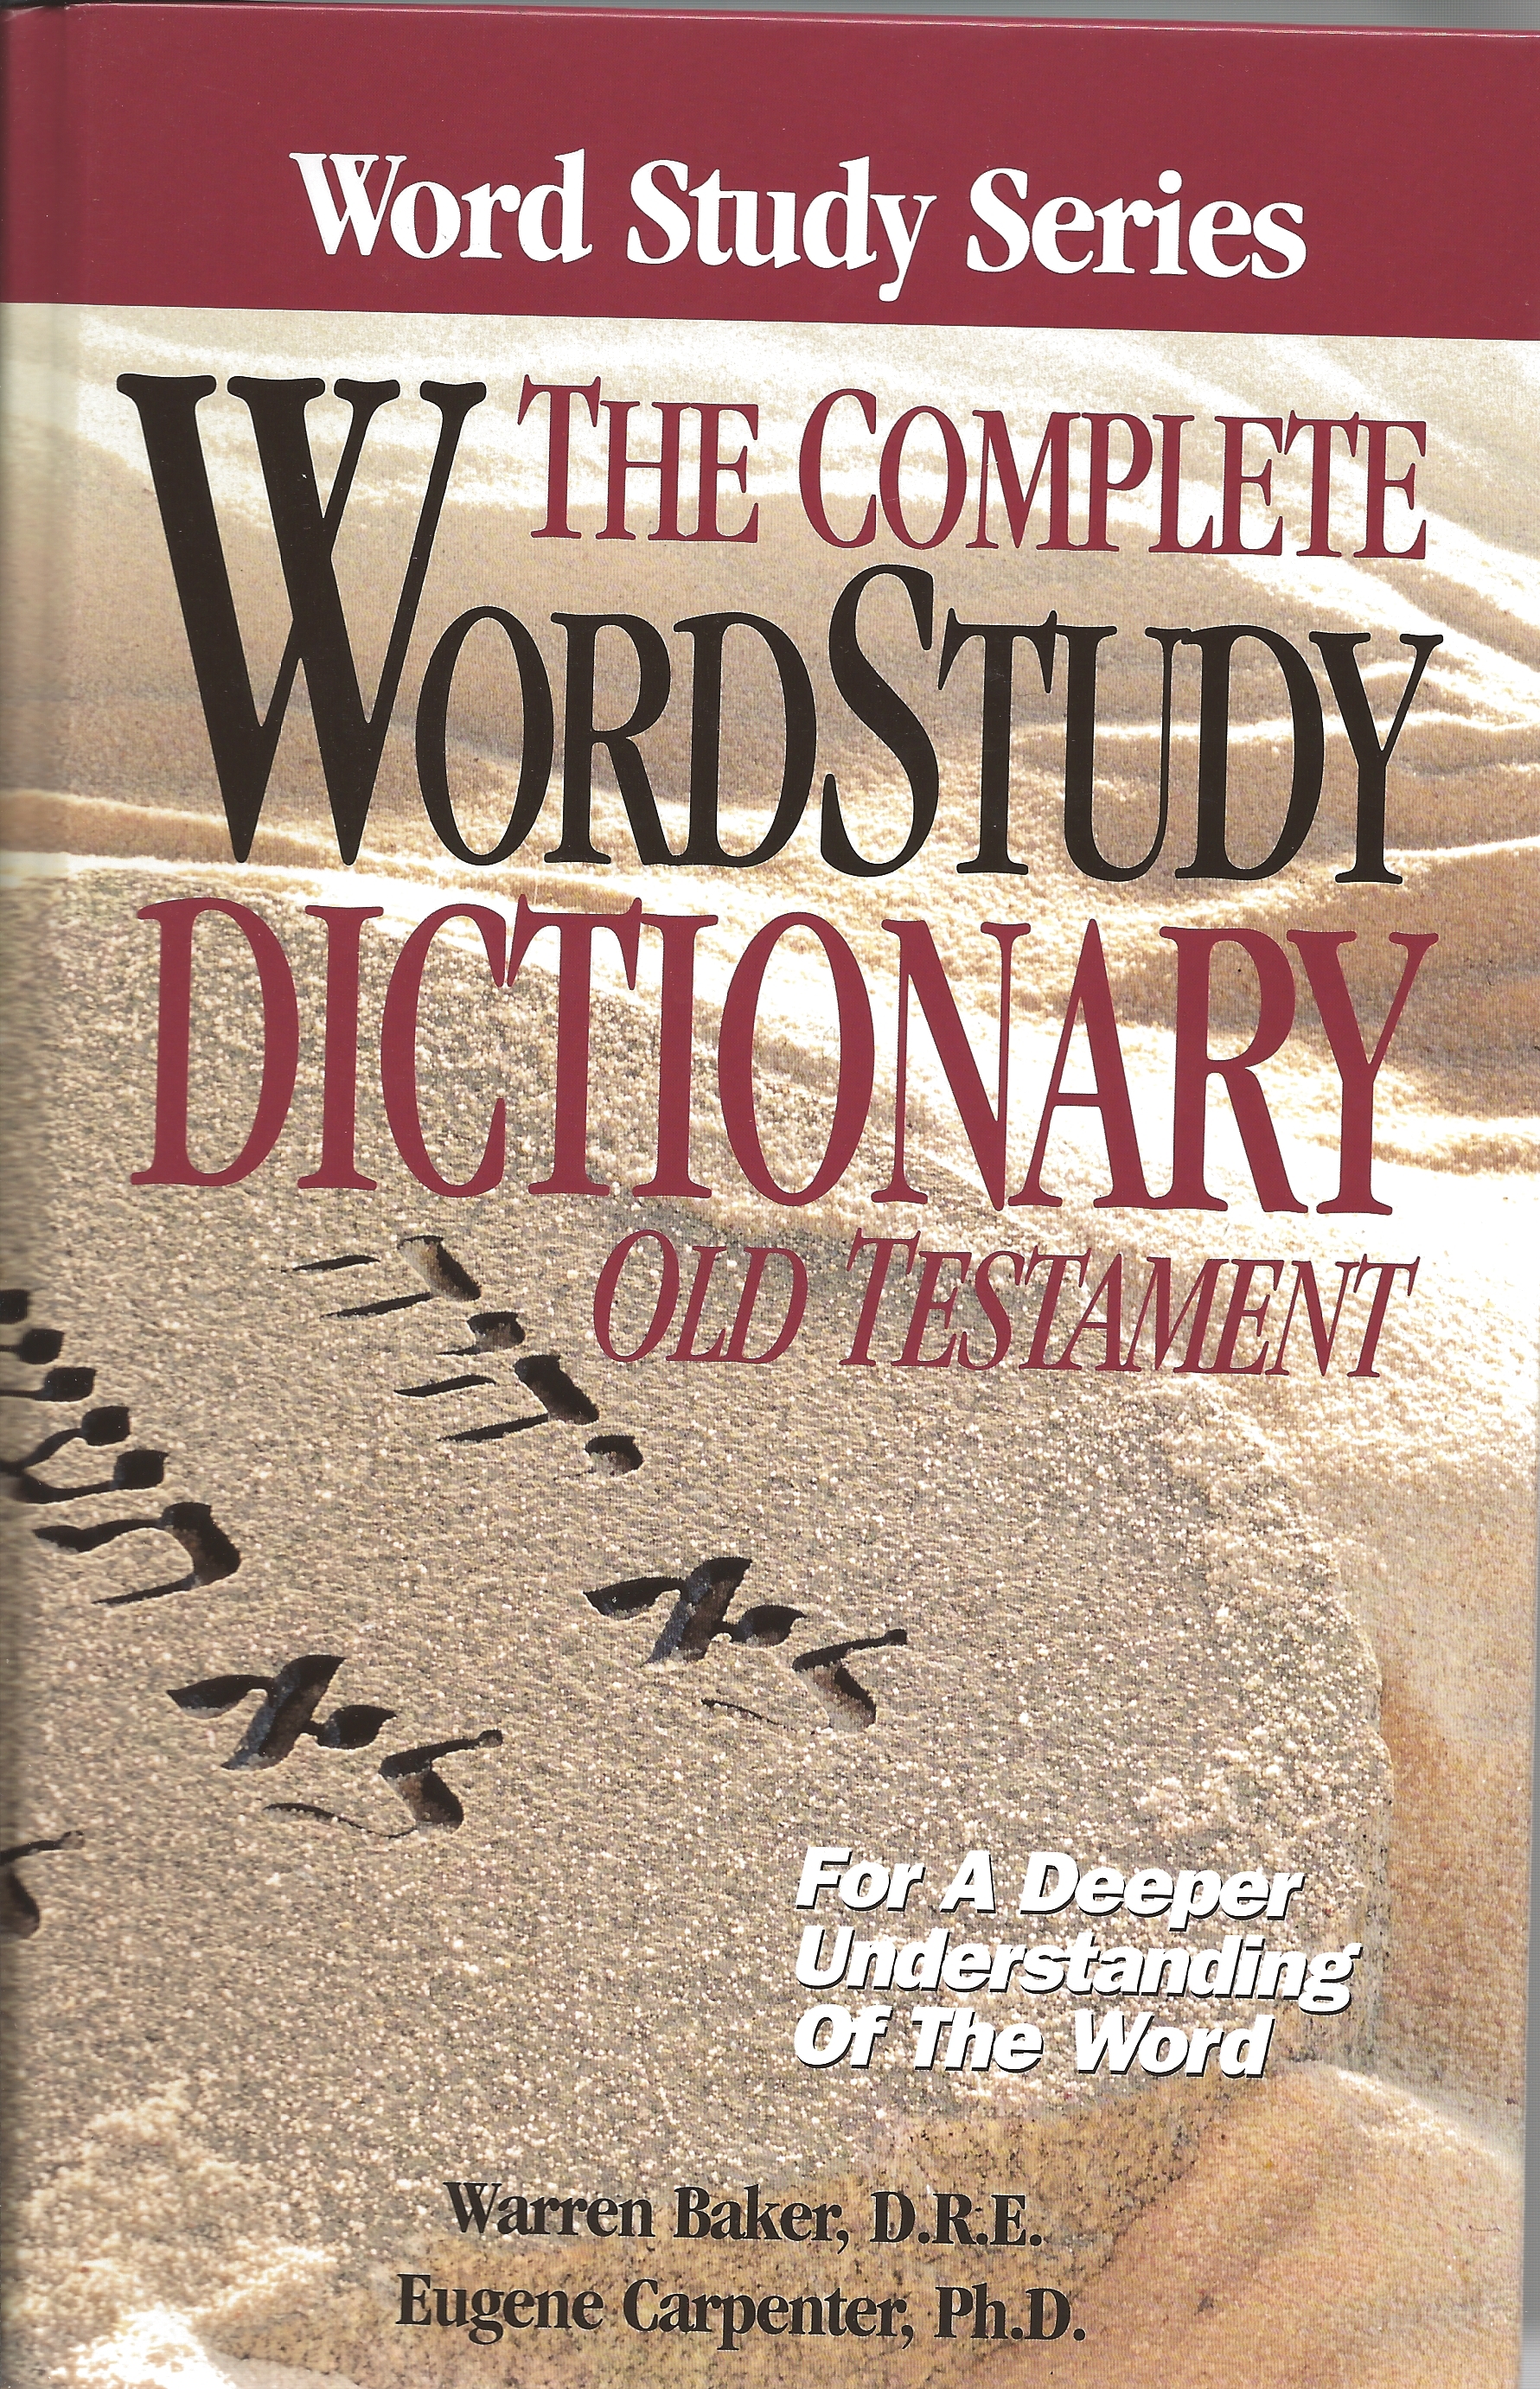 THE COMPLETE WORD STUDY DICTIONARY OLD TESTAMENT W. Baker - Click Image to Close